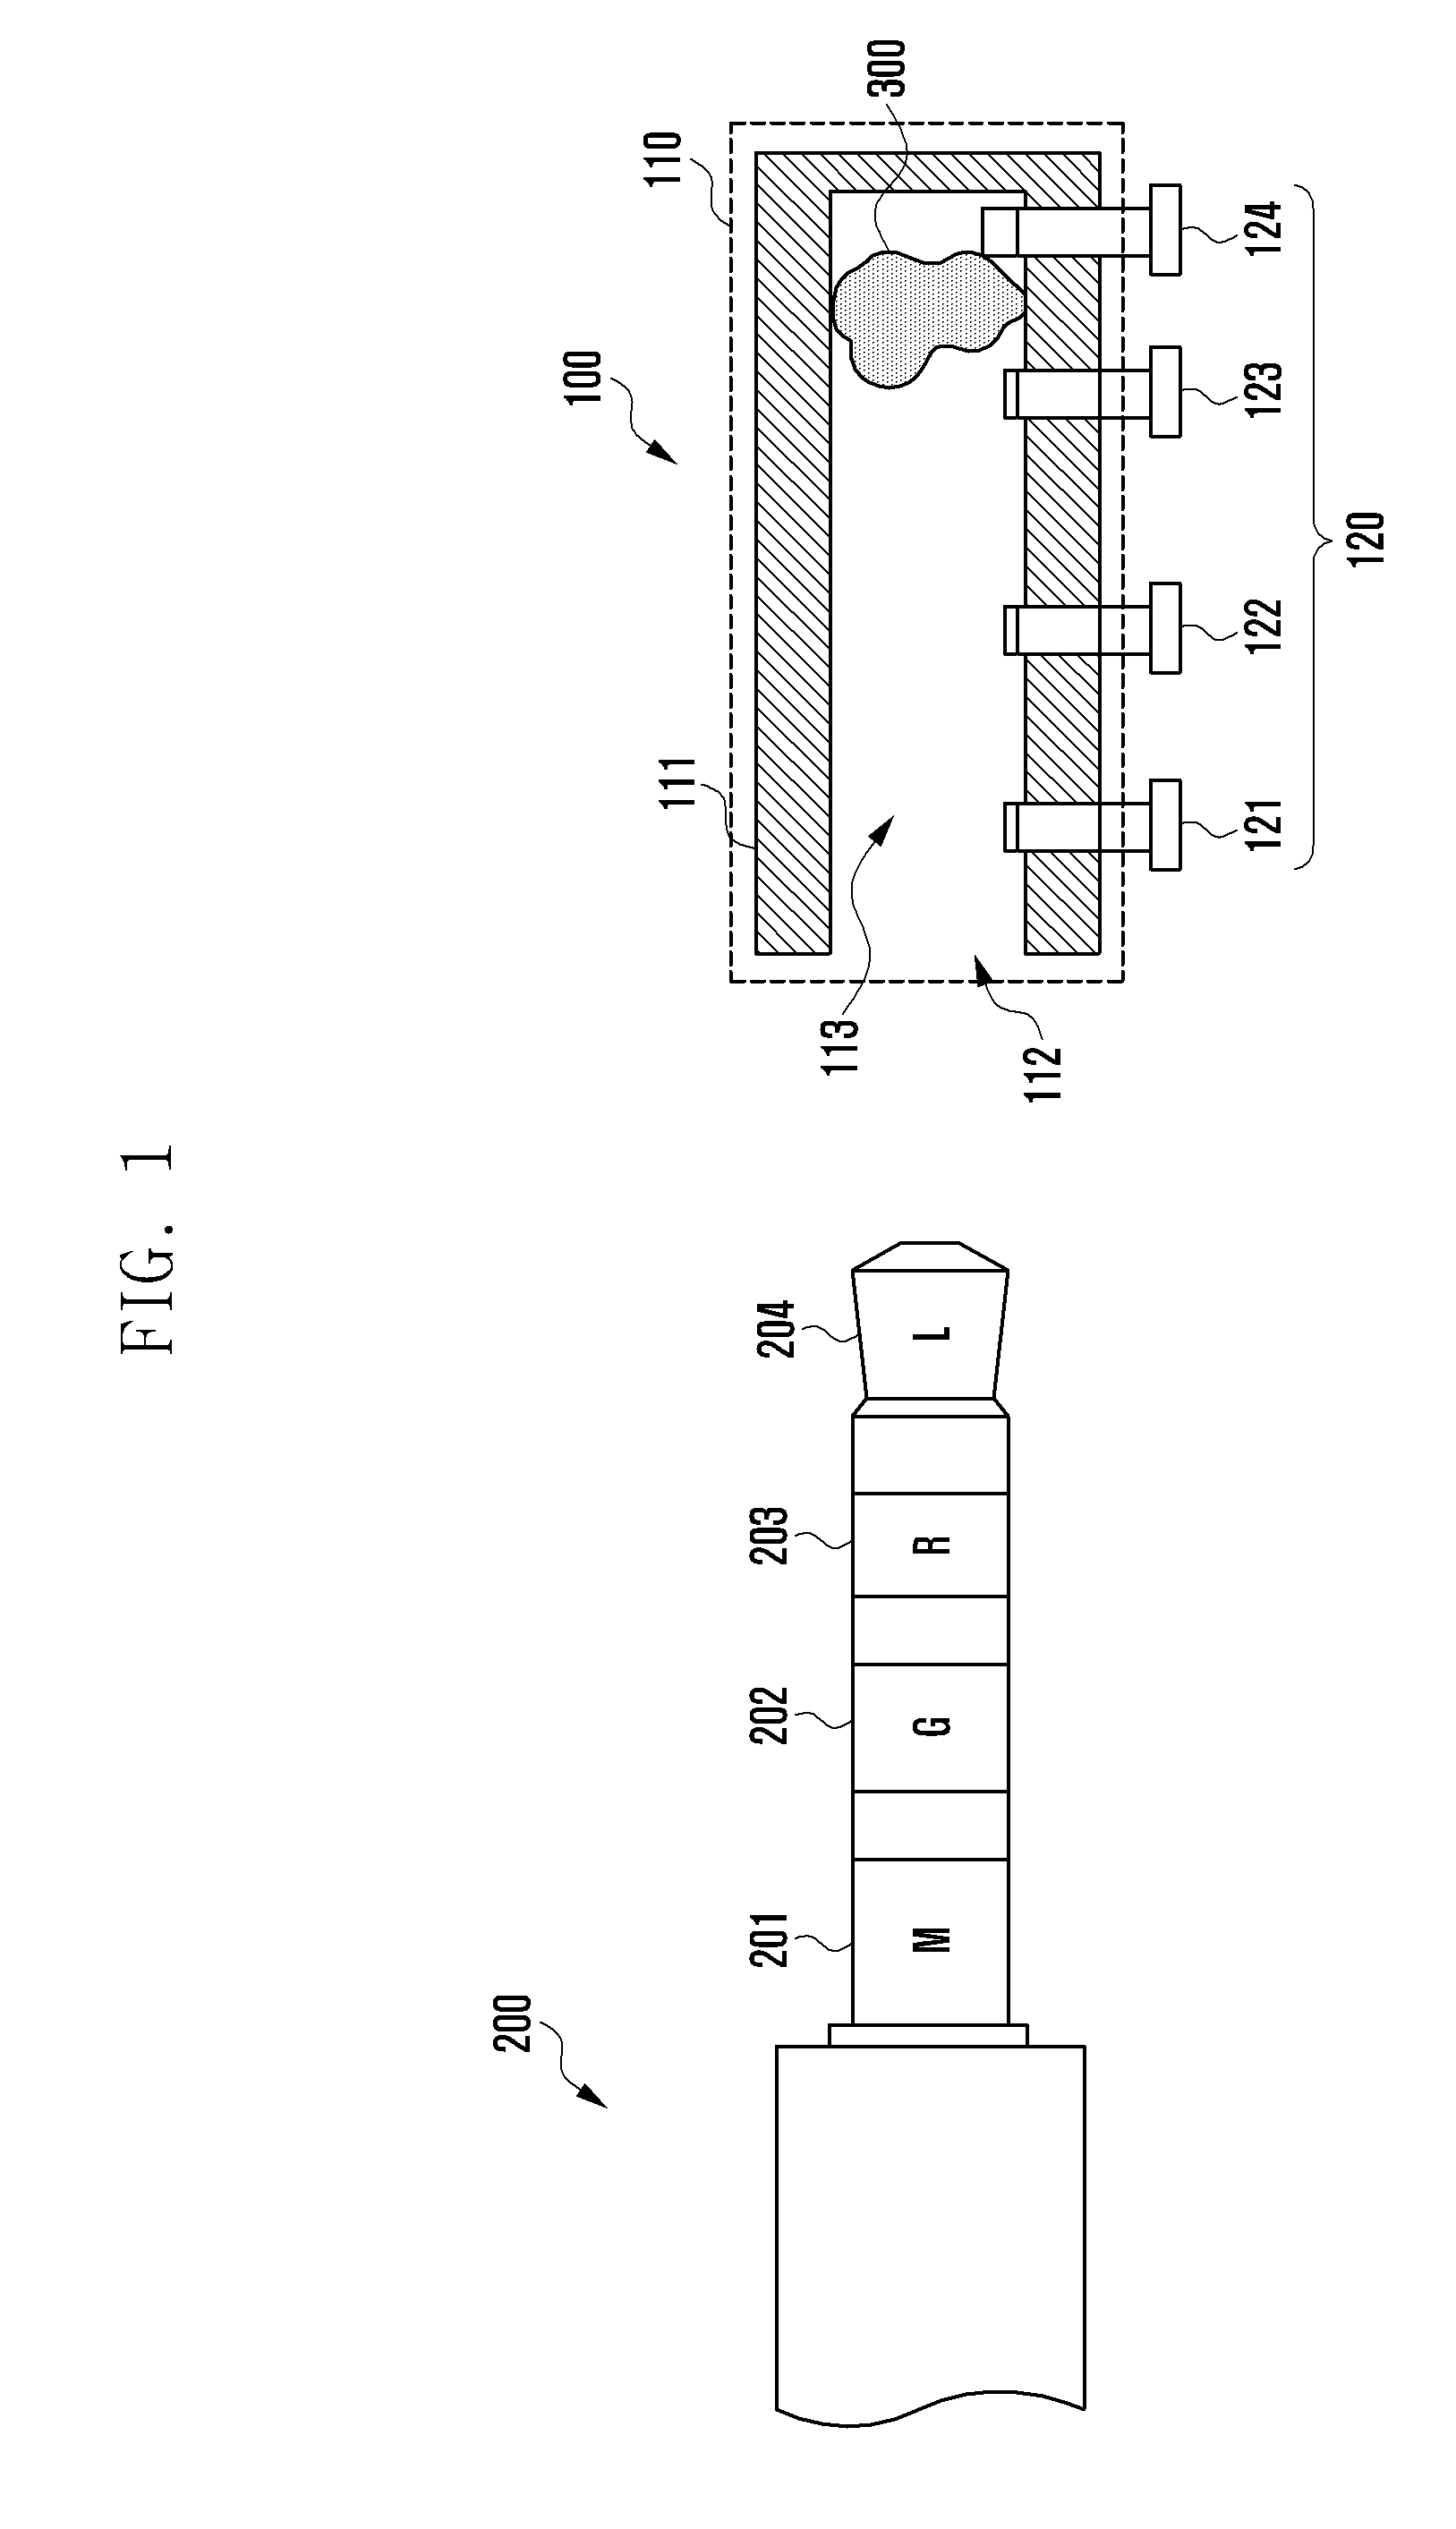 Electronic device and method of preventing erroneous recognizing inserting connector into earphone jack